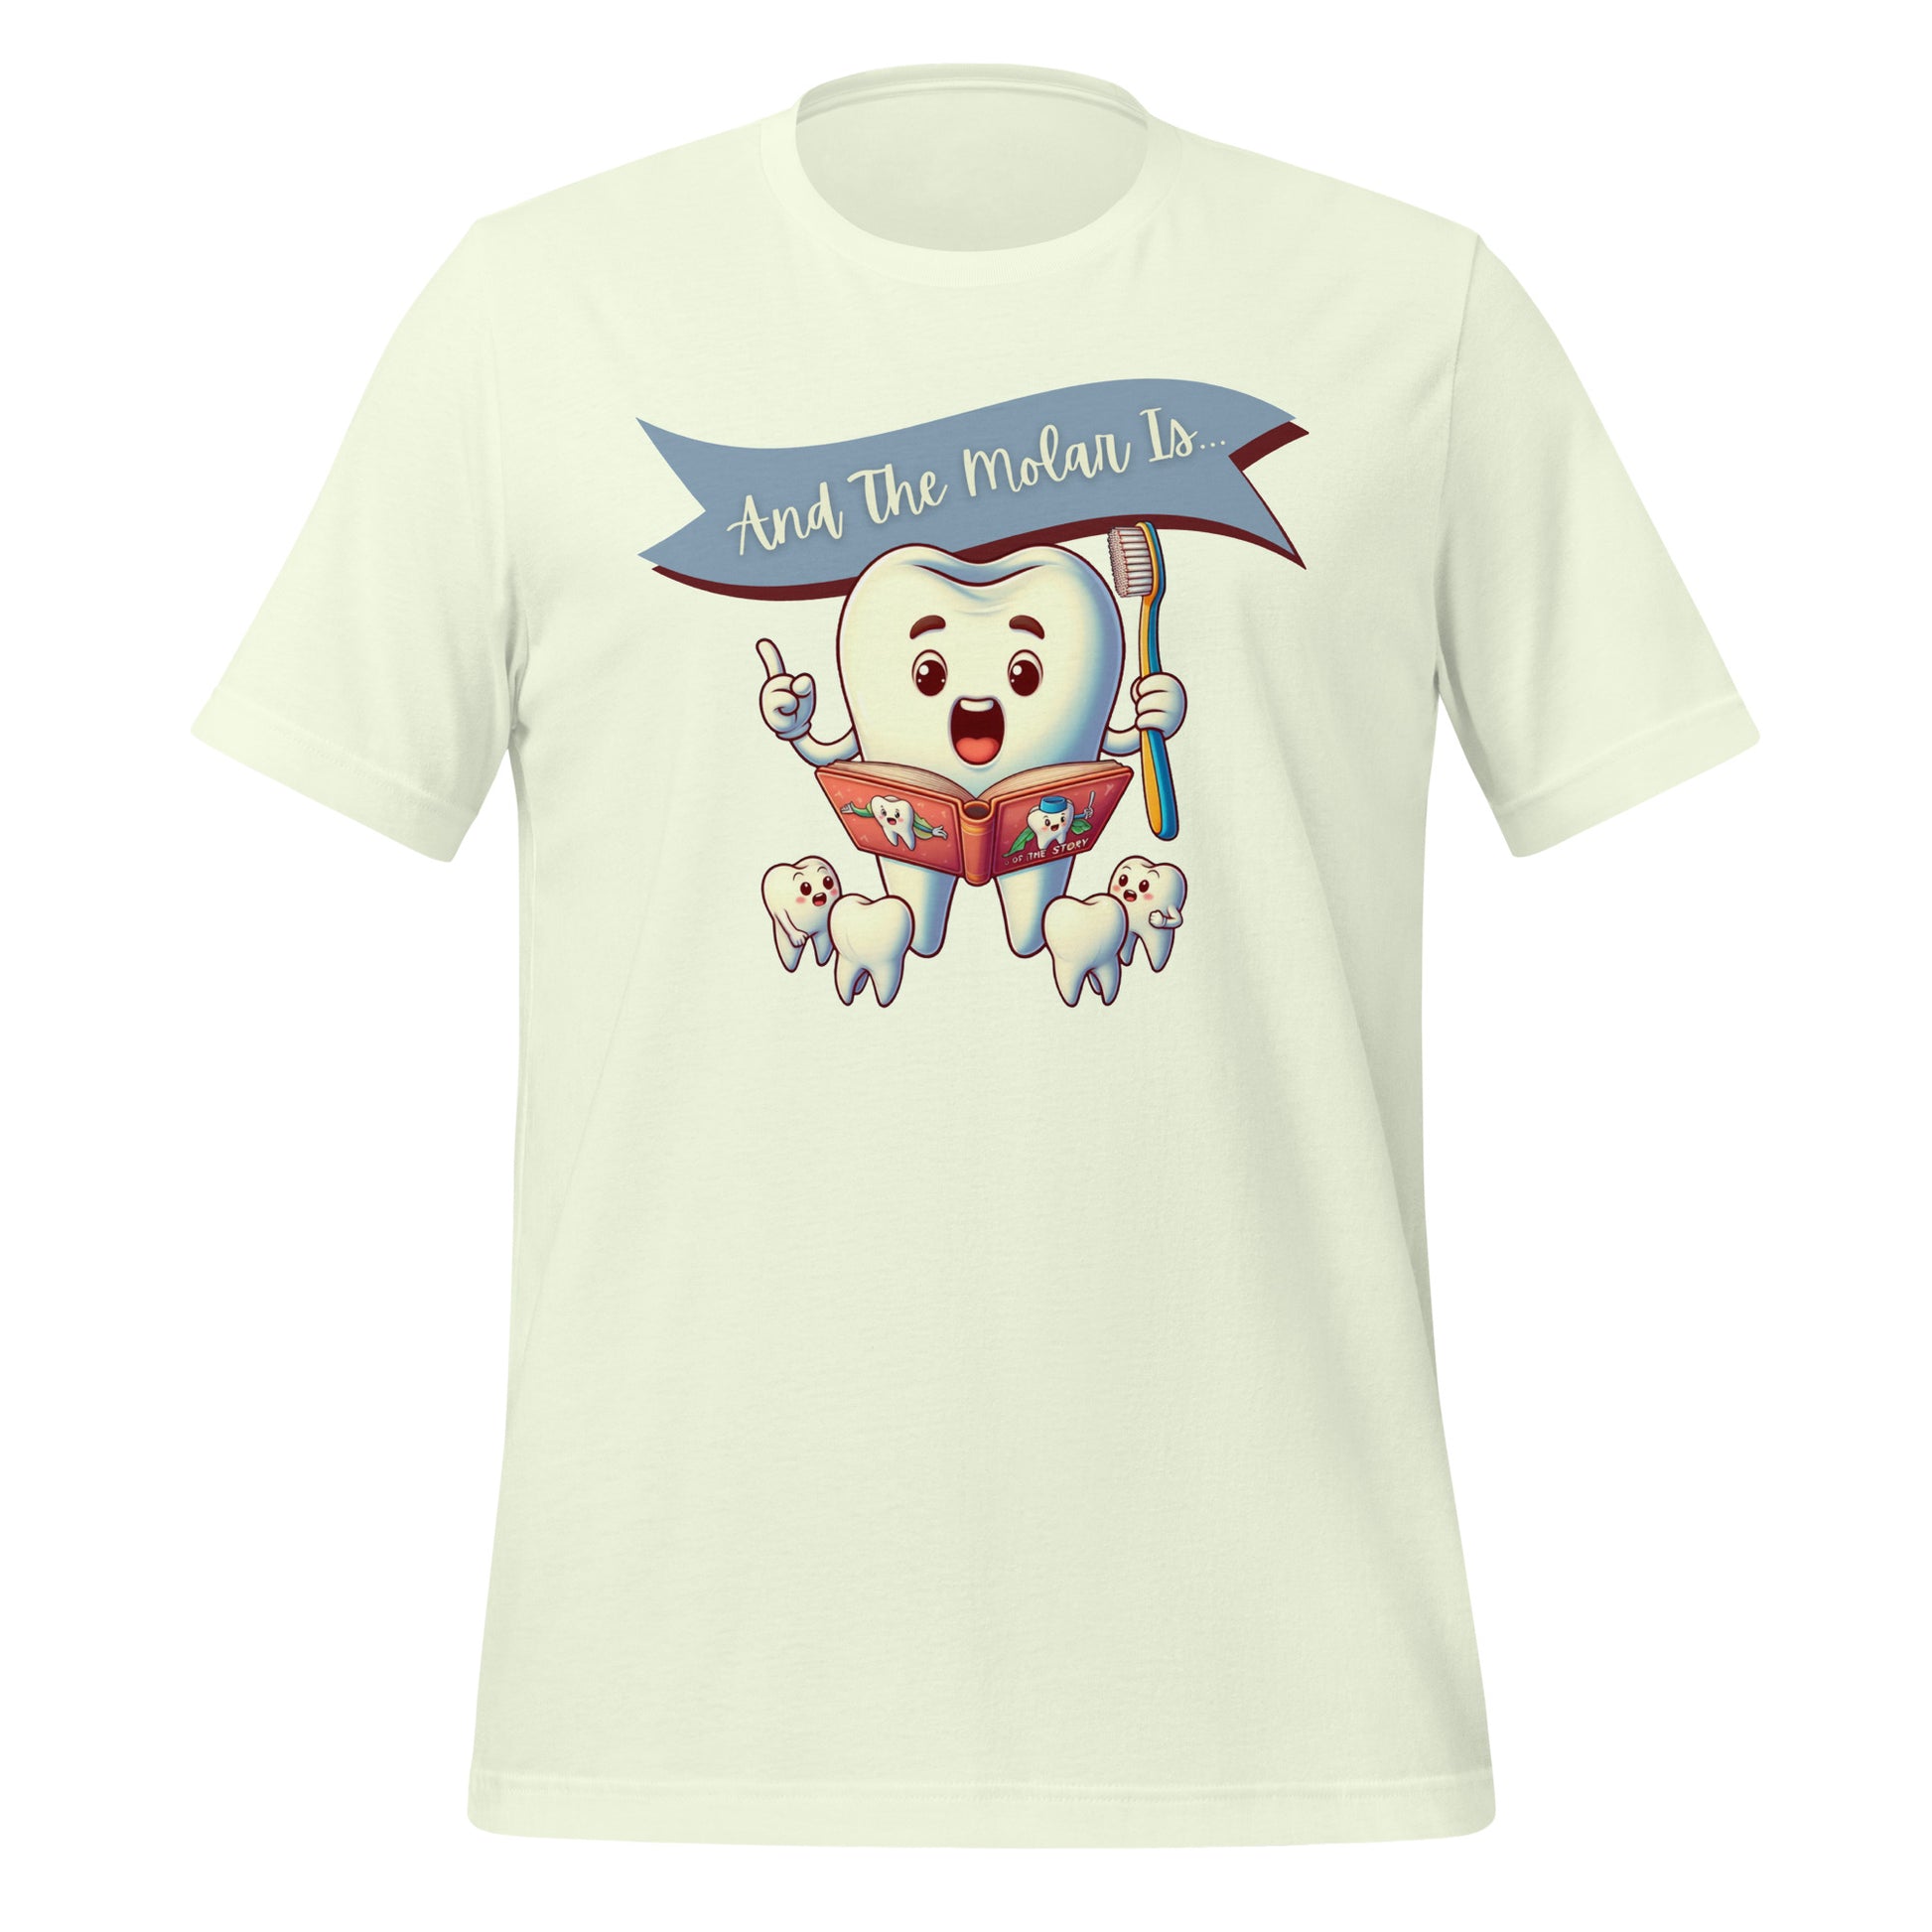 Cute dental shirt featuring a smiling tooth character reading a book with the caption ‘And The Molar Is,’ surrounded by smaller tooth characters. Citron color.